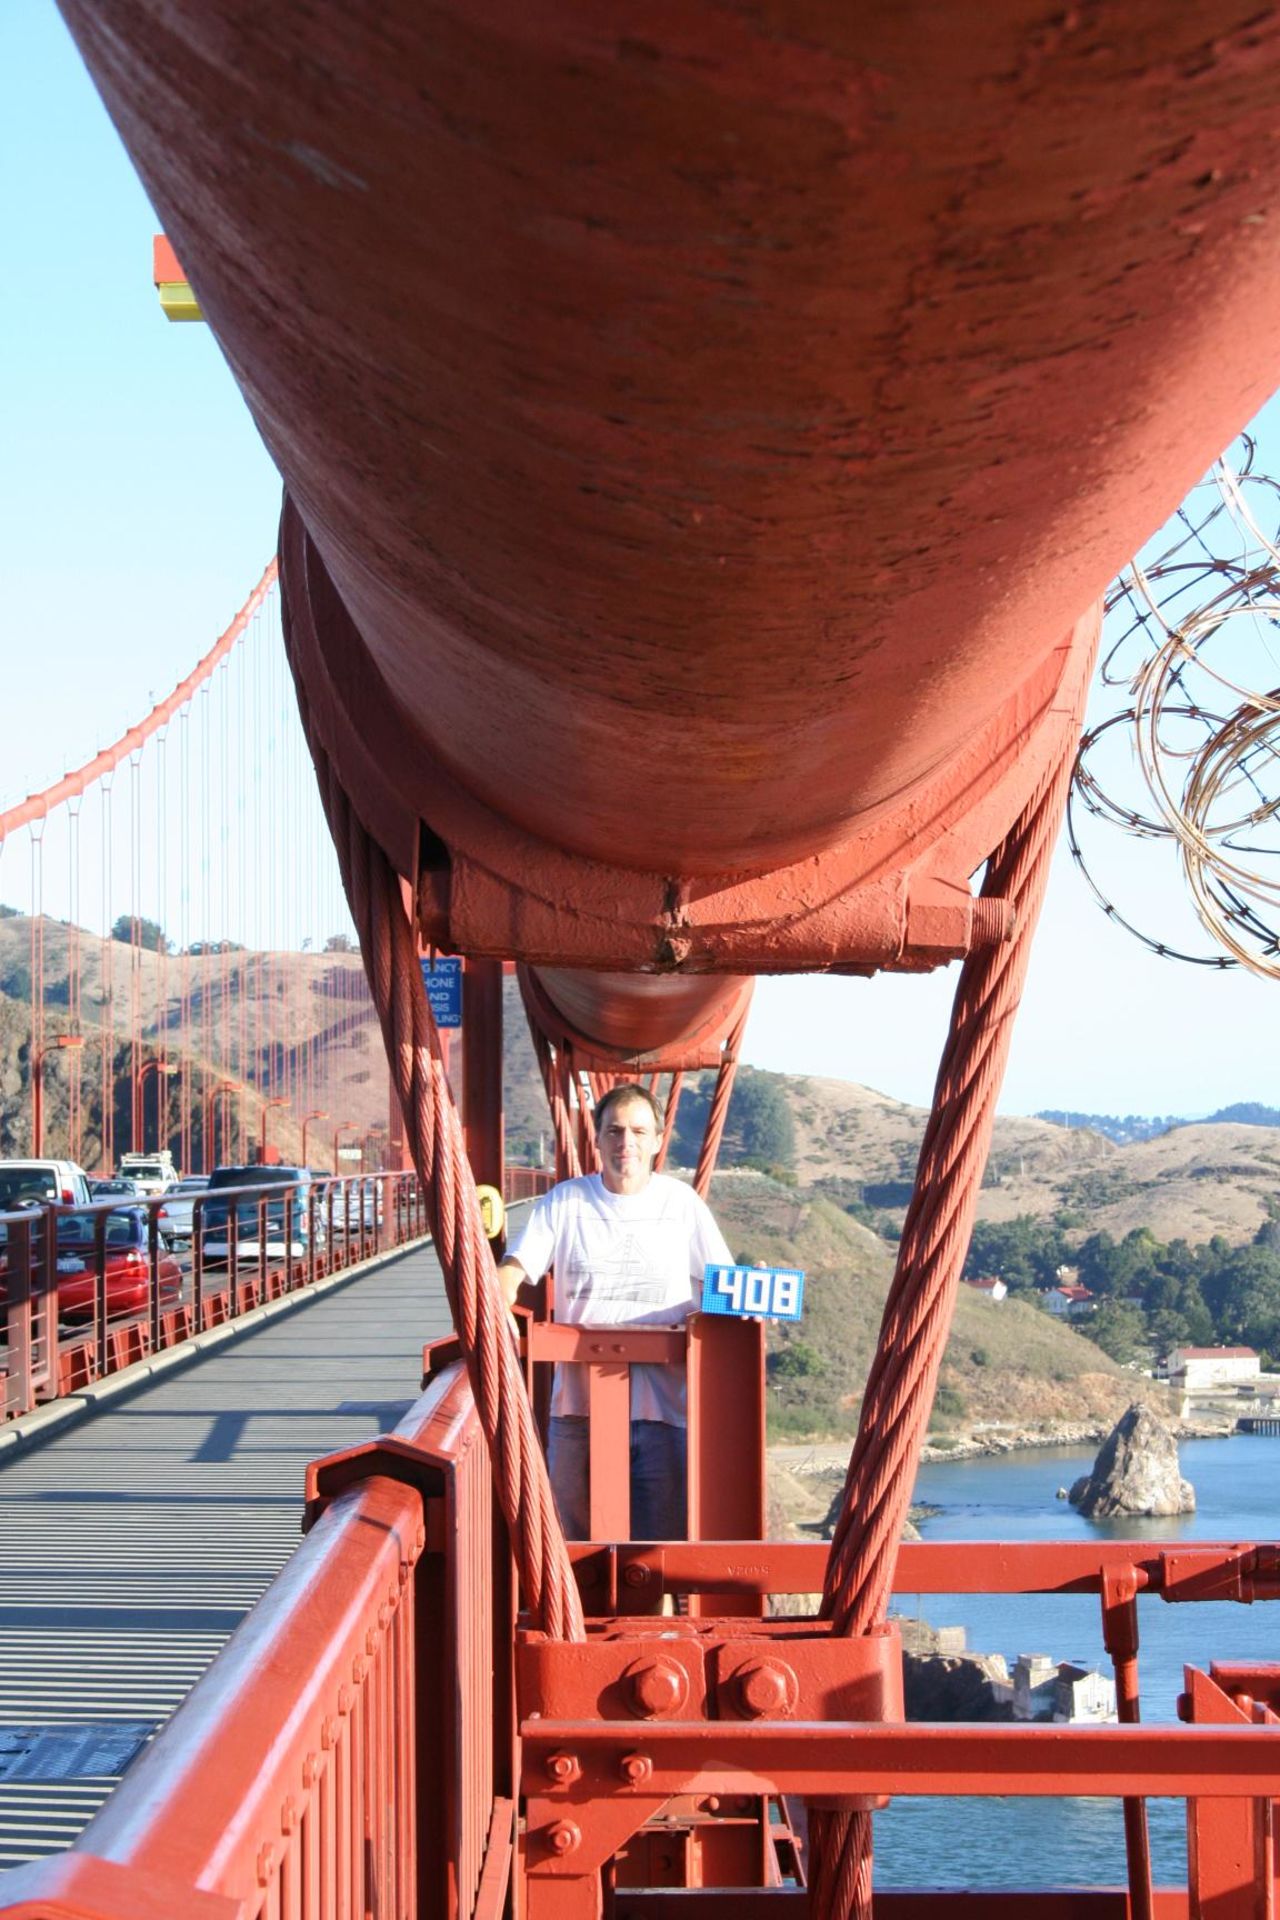 O'Donnell enjoys a visit to San Francisco's Golden Gate Bridge. Height: 220 feet (67 meters) above the water,<a href="http://goldengatebridge.org/research/factsGGBDesign.php" target="_blank" target="_blank"> according to the bridge website.</a>